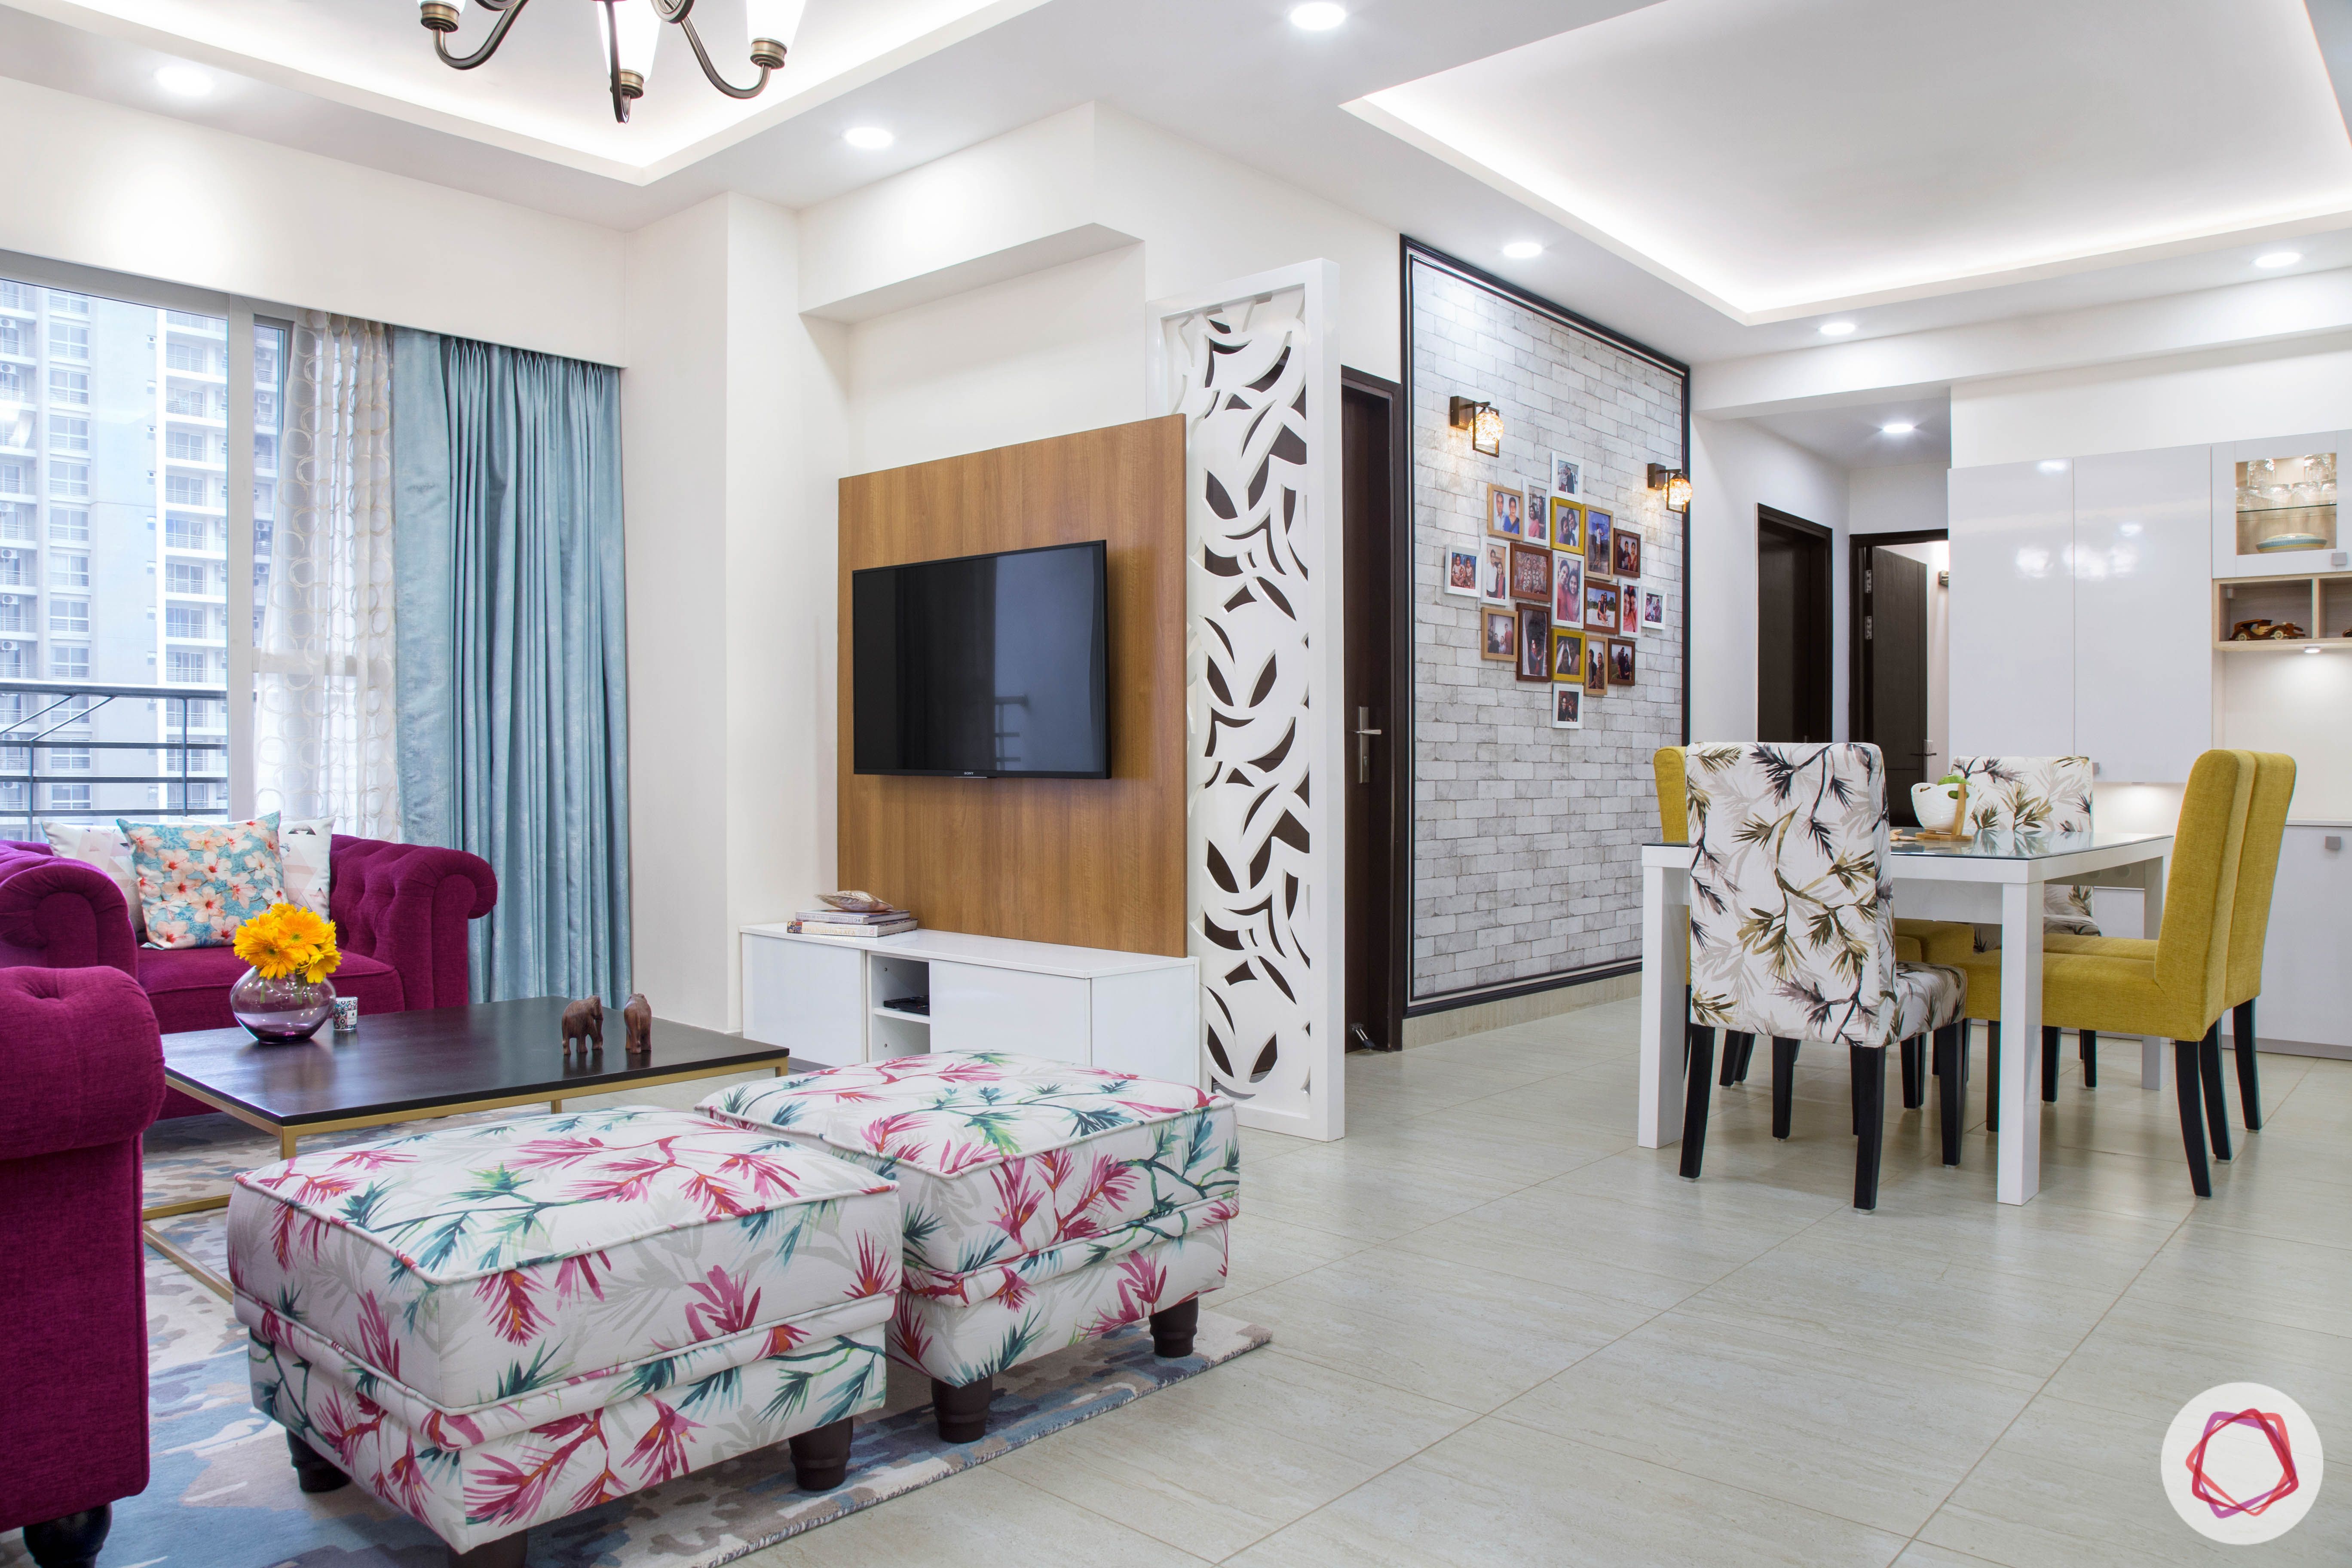 Cleo county noida_home entrance view with combined living and dining room